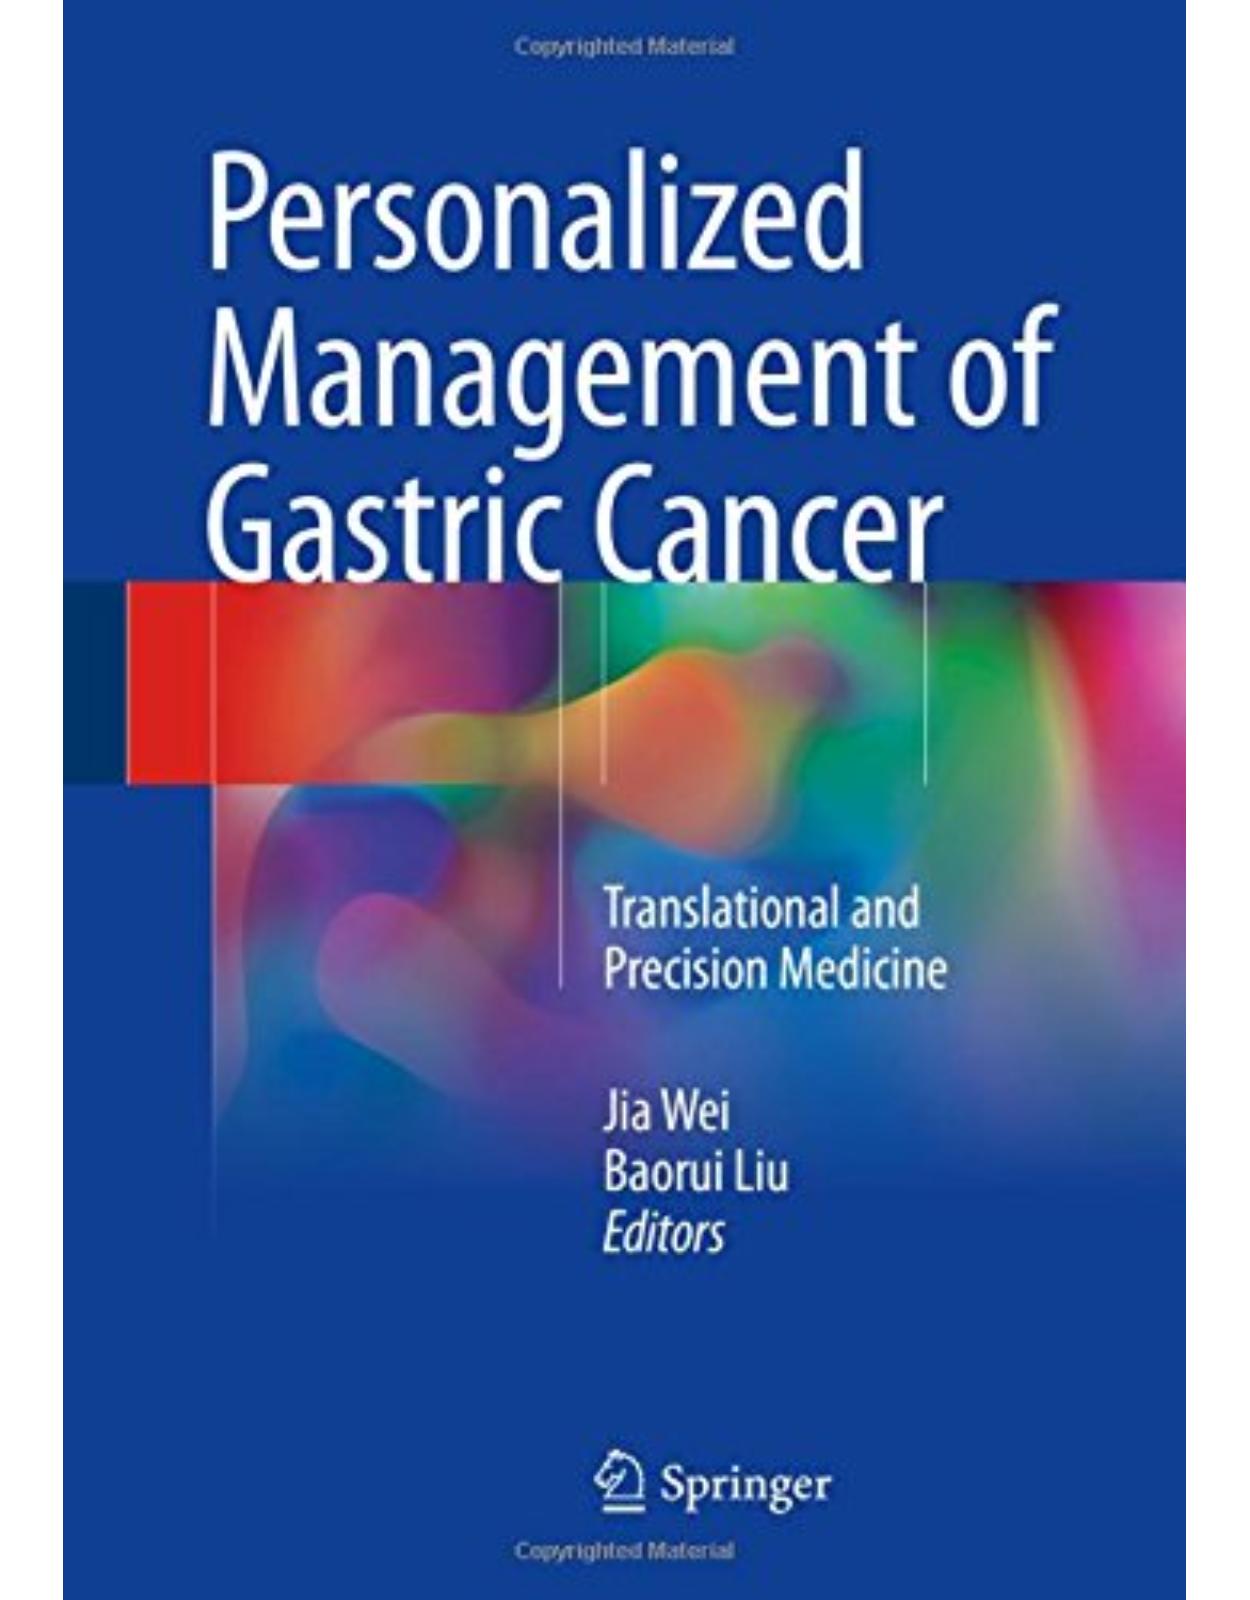 Personalized Management of Gastric Cancer: Translational and Precision Medicine